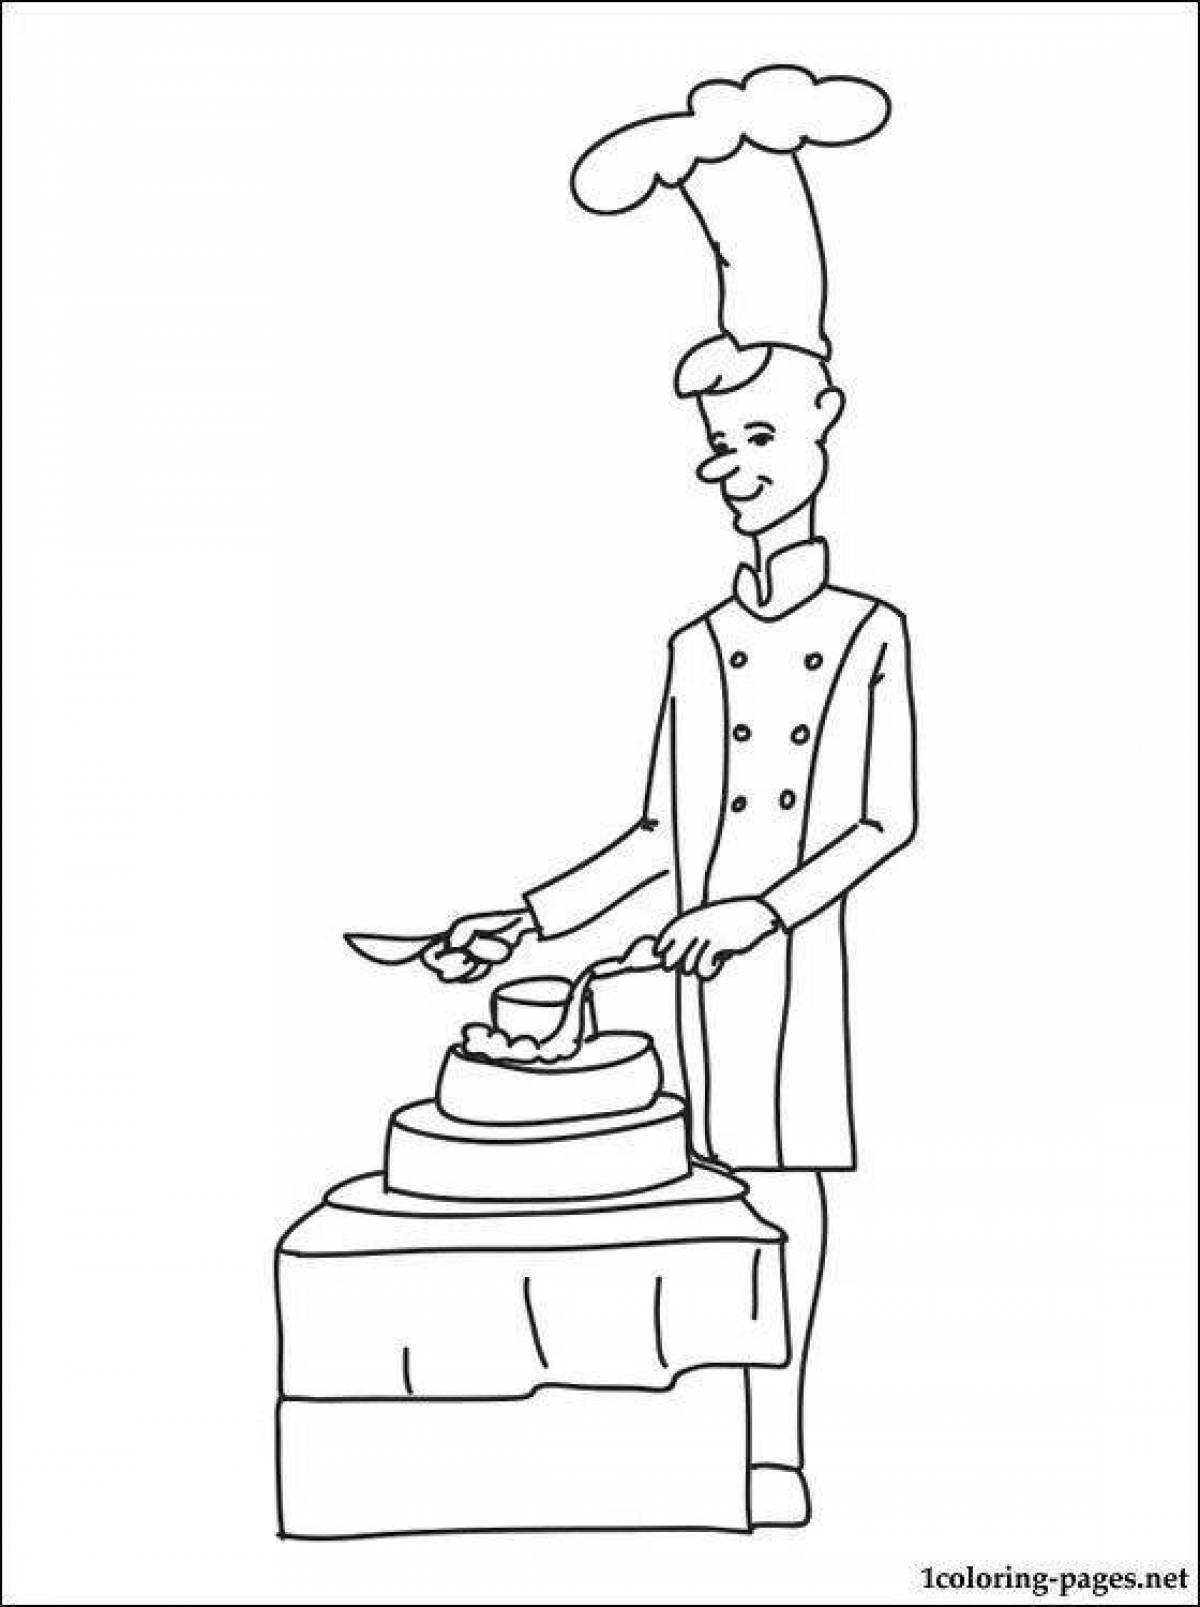 Creative pastry chef coloring book for kids